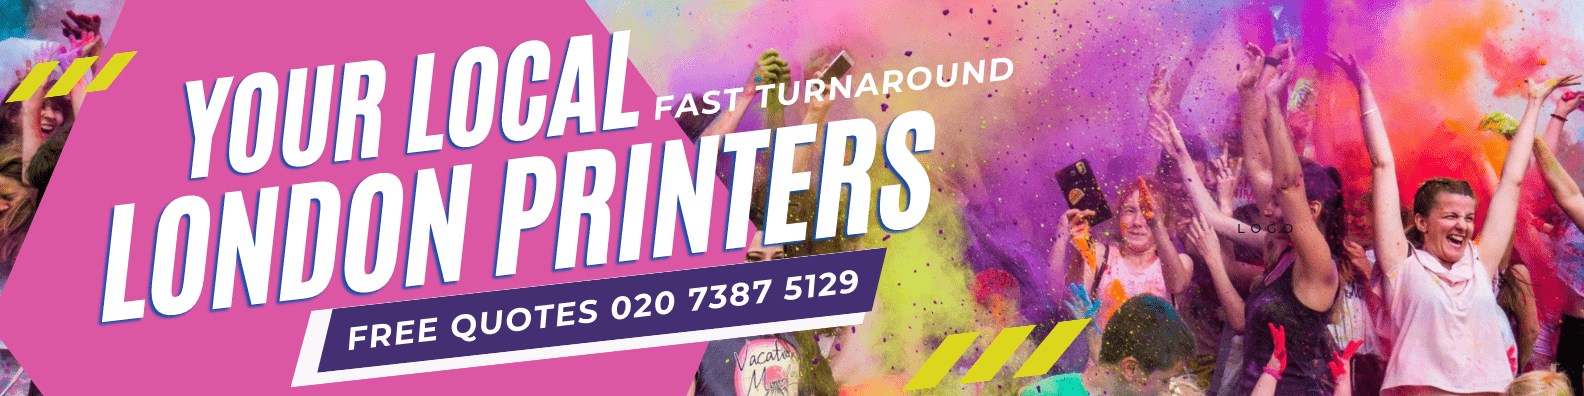 Your local London printers for exceptional print services. Call 020 7387 5129 for free quotes and fast turnaround times. Proudly based in London WI, we specialise in printing flyers, leaflets, booklets, posters, and more. Trust Western Printers for all your print marketing jobs!